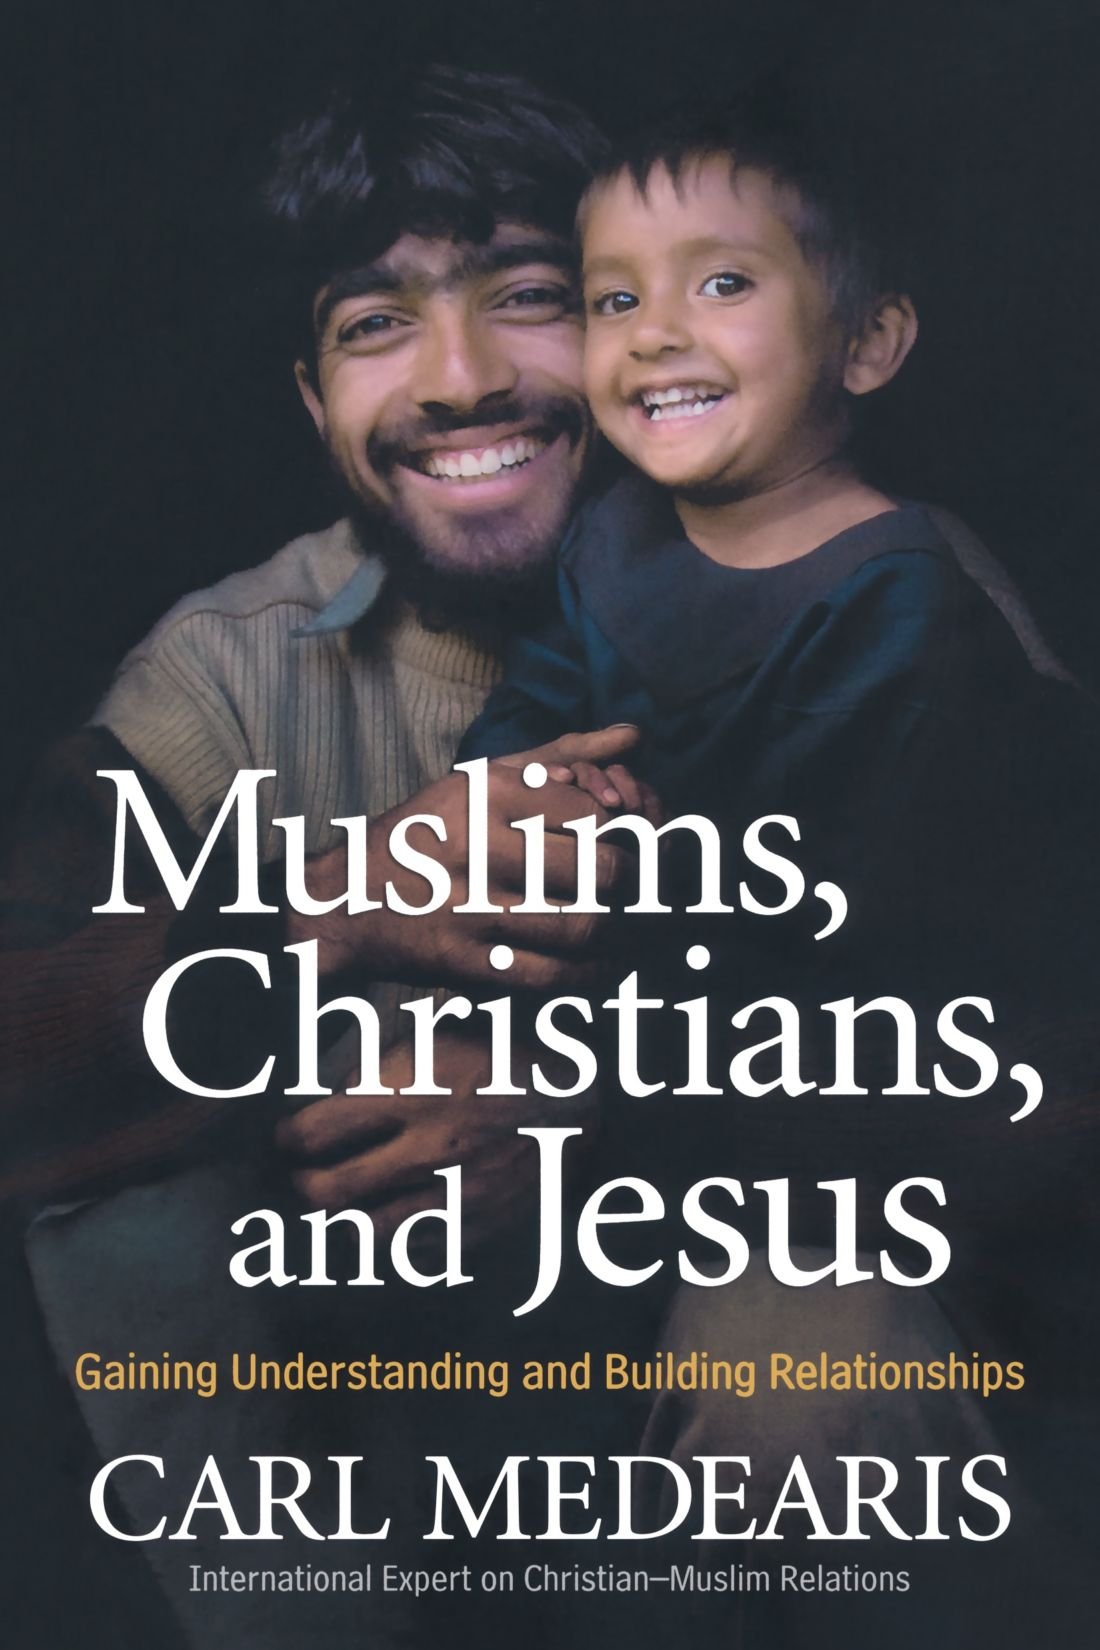 Muslims, Christians, and Jesus: Gaining Understanding and Building Relationships